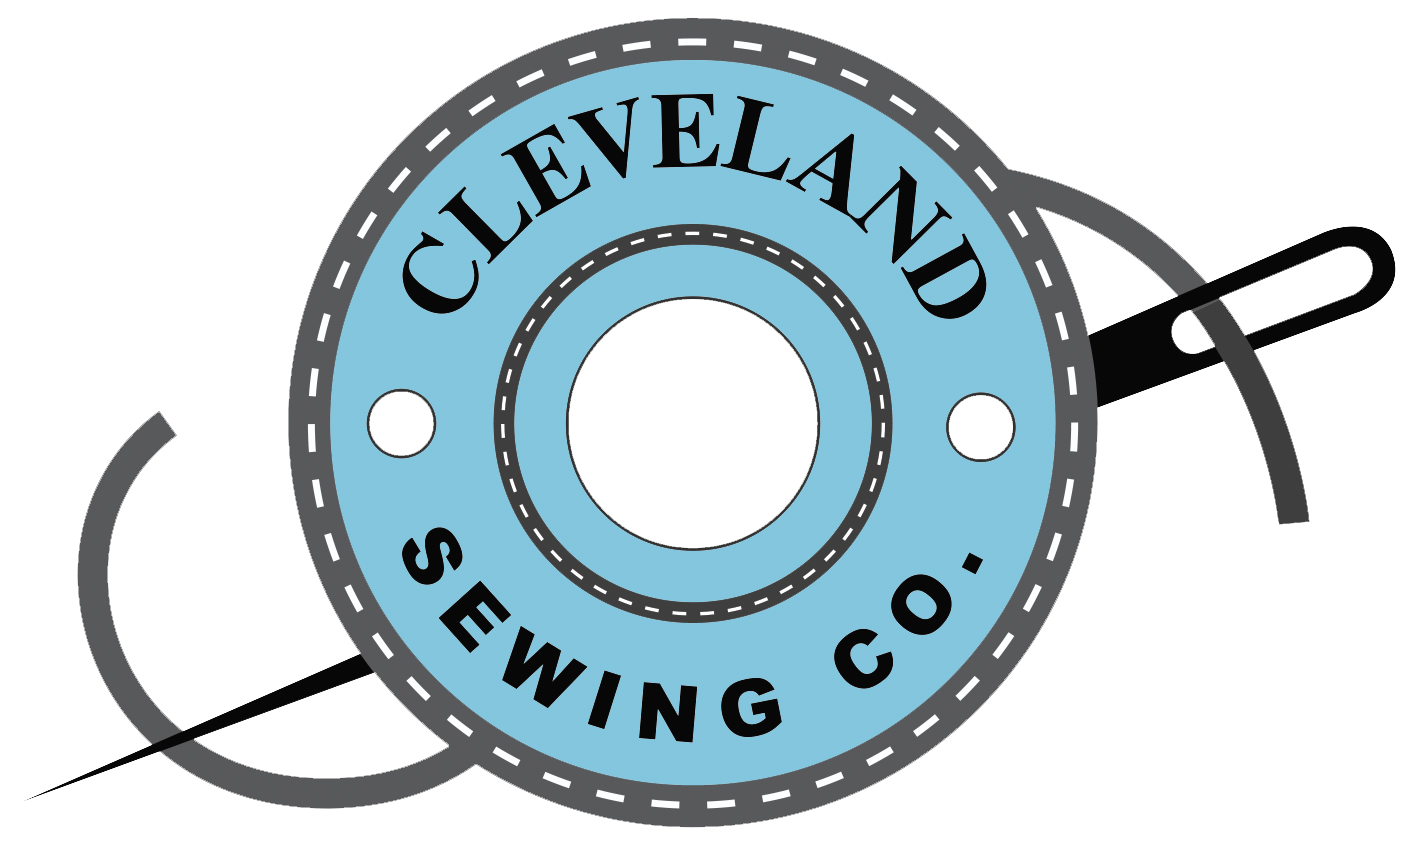 Former Cleveland Sewing company logo